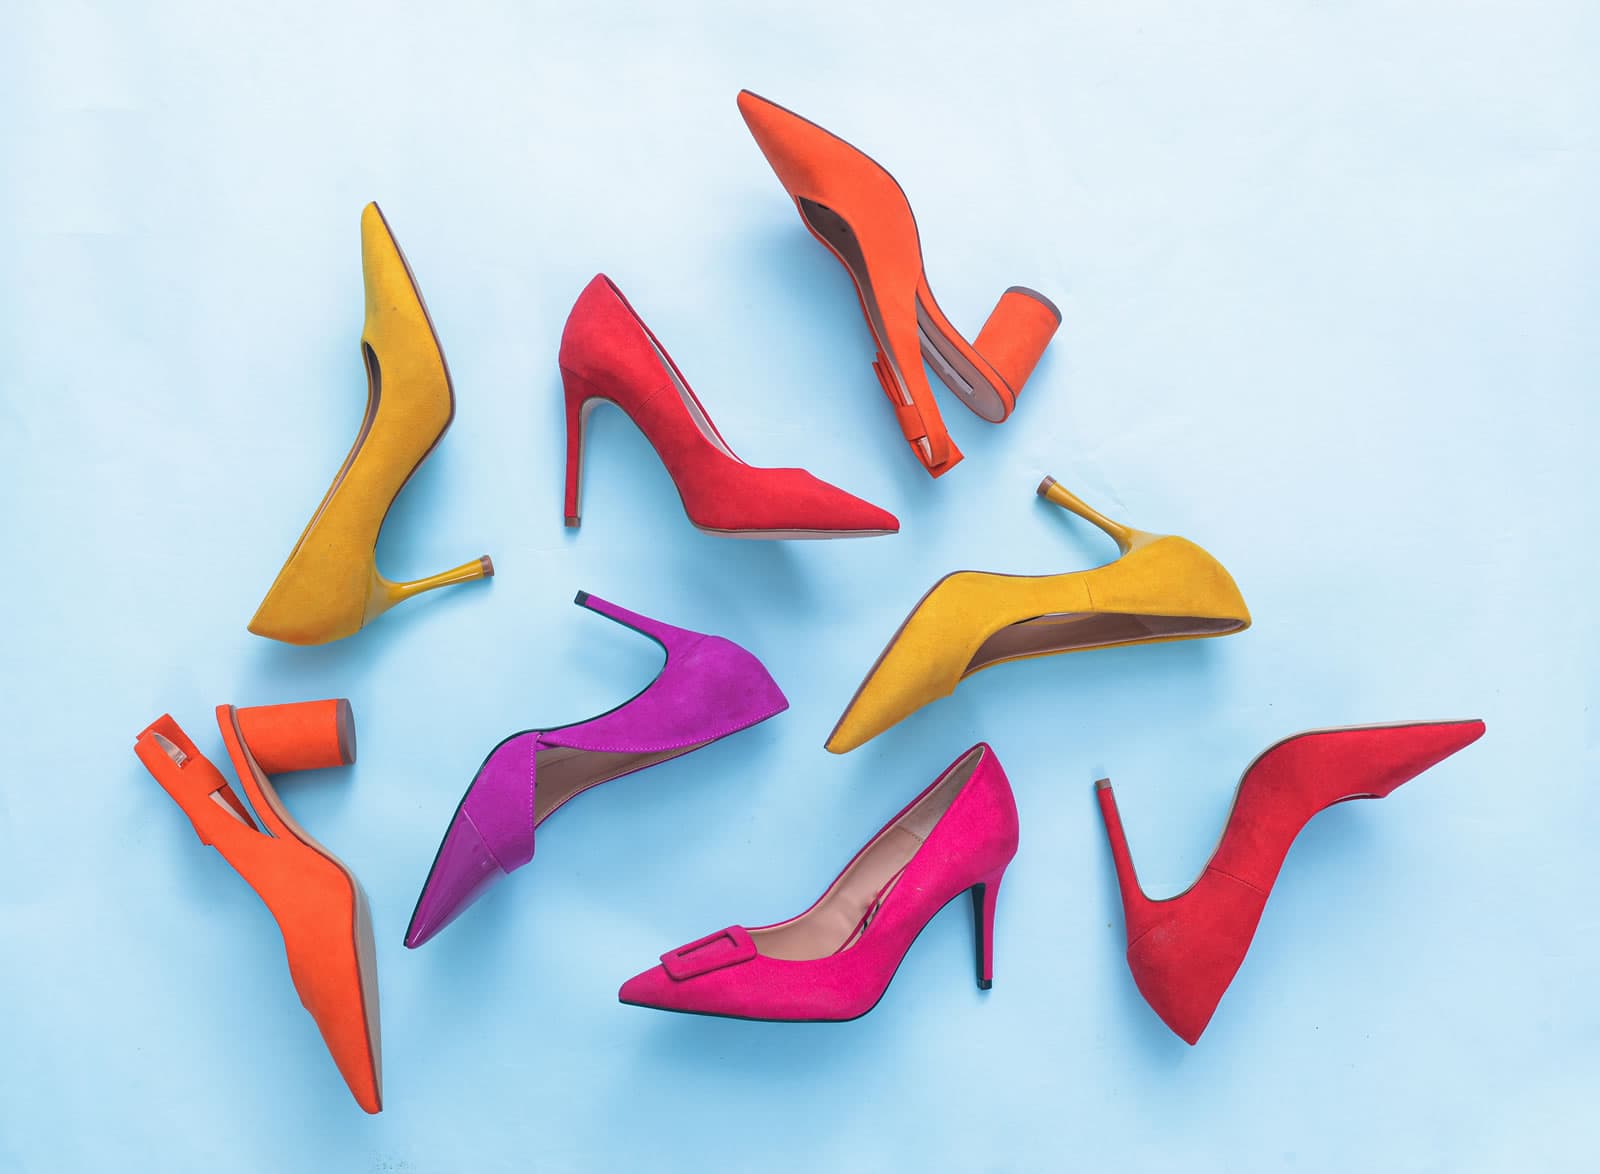 Arrangement of colouful women's high-heeled shoes in pink, orange, yellow, red and purple on blue background